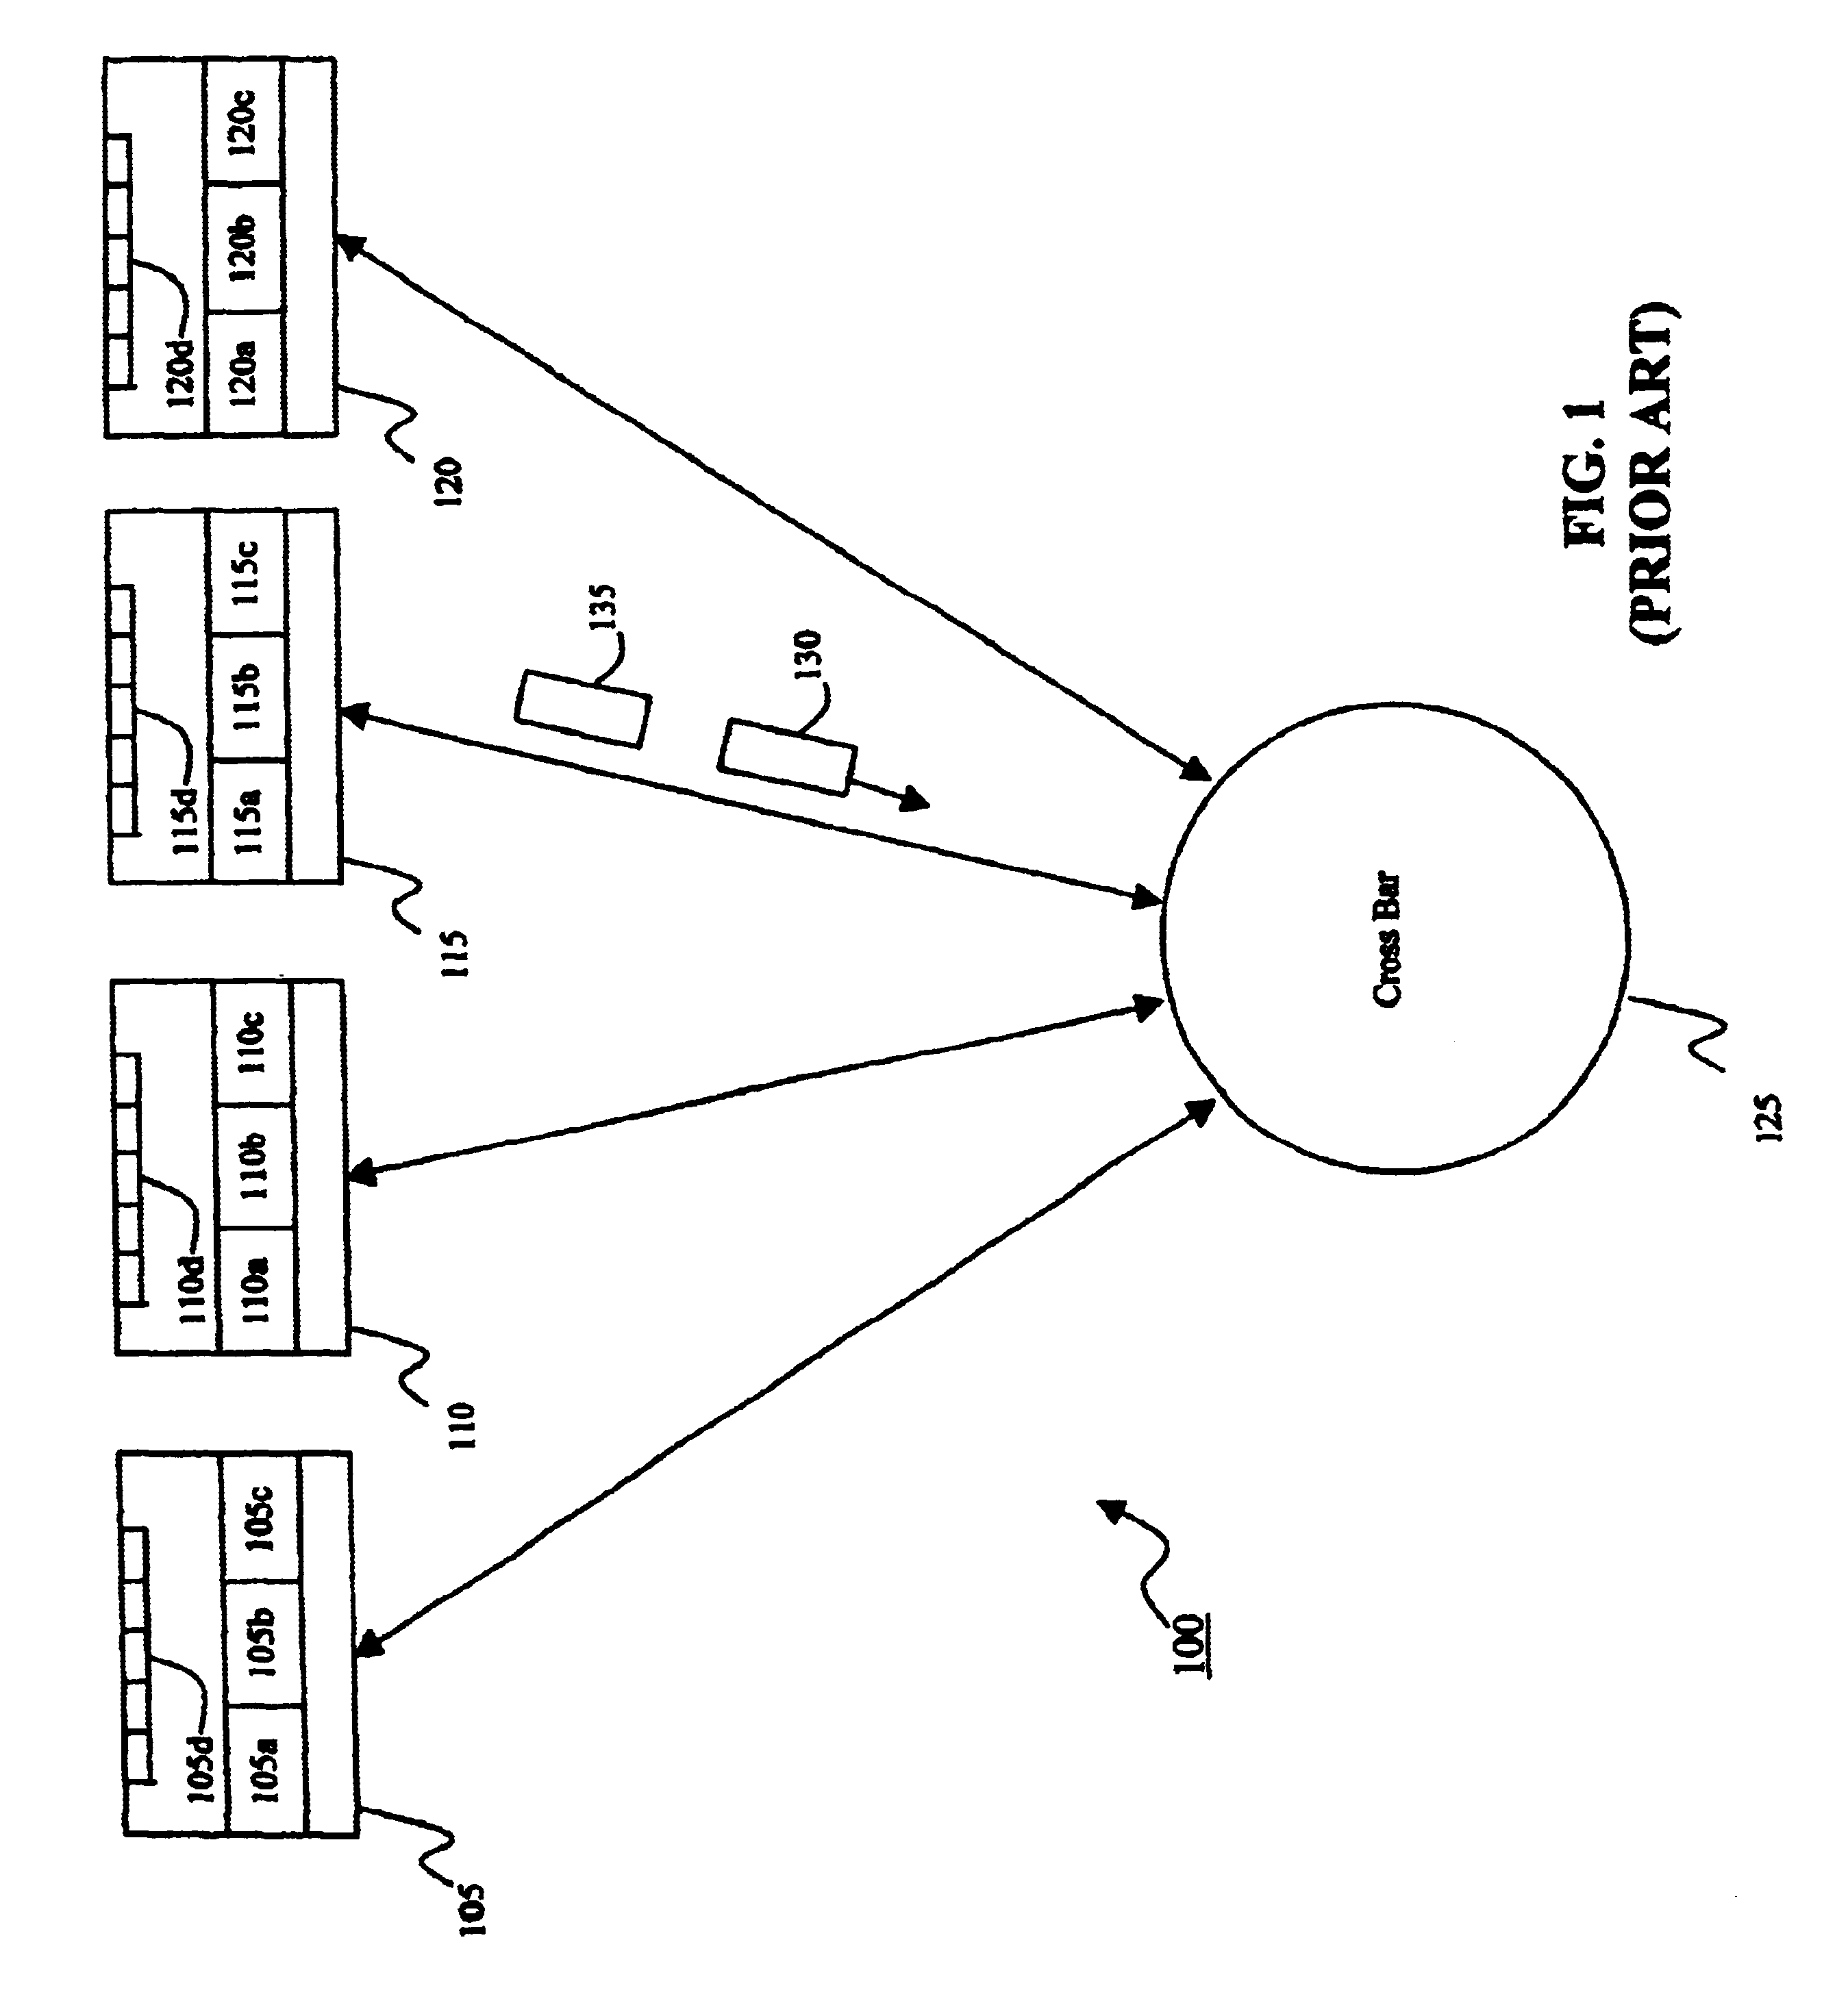 Distributed switch memory architecture